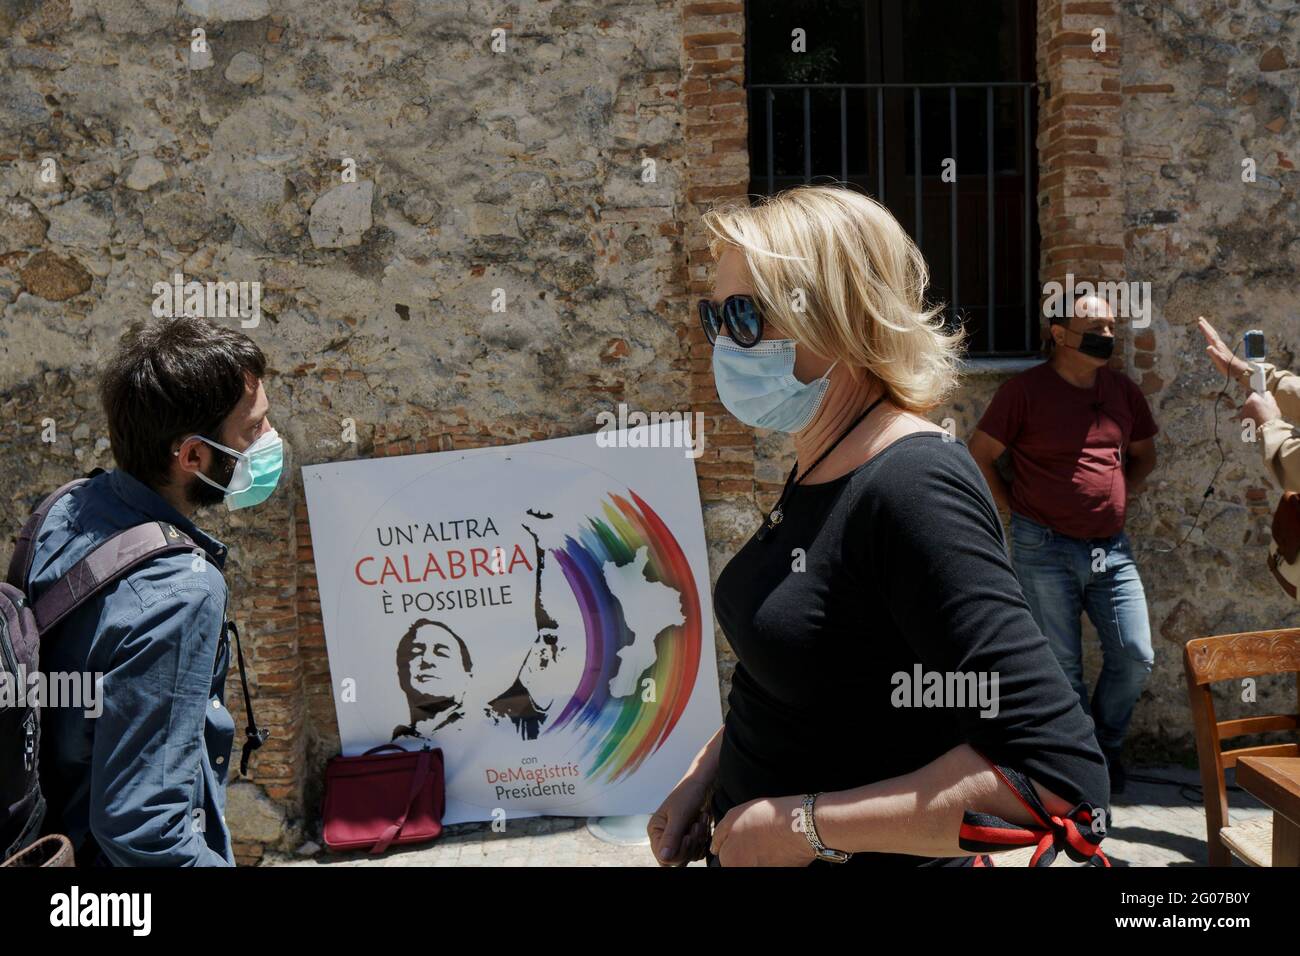 A woman passing by the banner with the new list's logo, during the press conference.Domenico Lucano “Mimmo”, former pro-migrant mayor of Riace, presented the electoral list “Un’Altra Calabria è possibile” (Another Calabria is possible) for the 2021 Calabrian regional election during a press conference hosted by Journalist Pietro Melia close to the local restaurant 'Taverna Donna Rosa'. The list will support the candidature of the mayor of Napoli, Luigi de Magistris, as Calabria Region’s Governor. Stock Photo